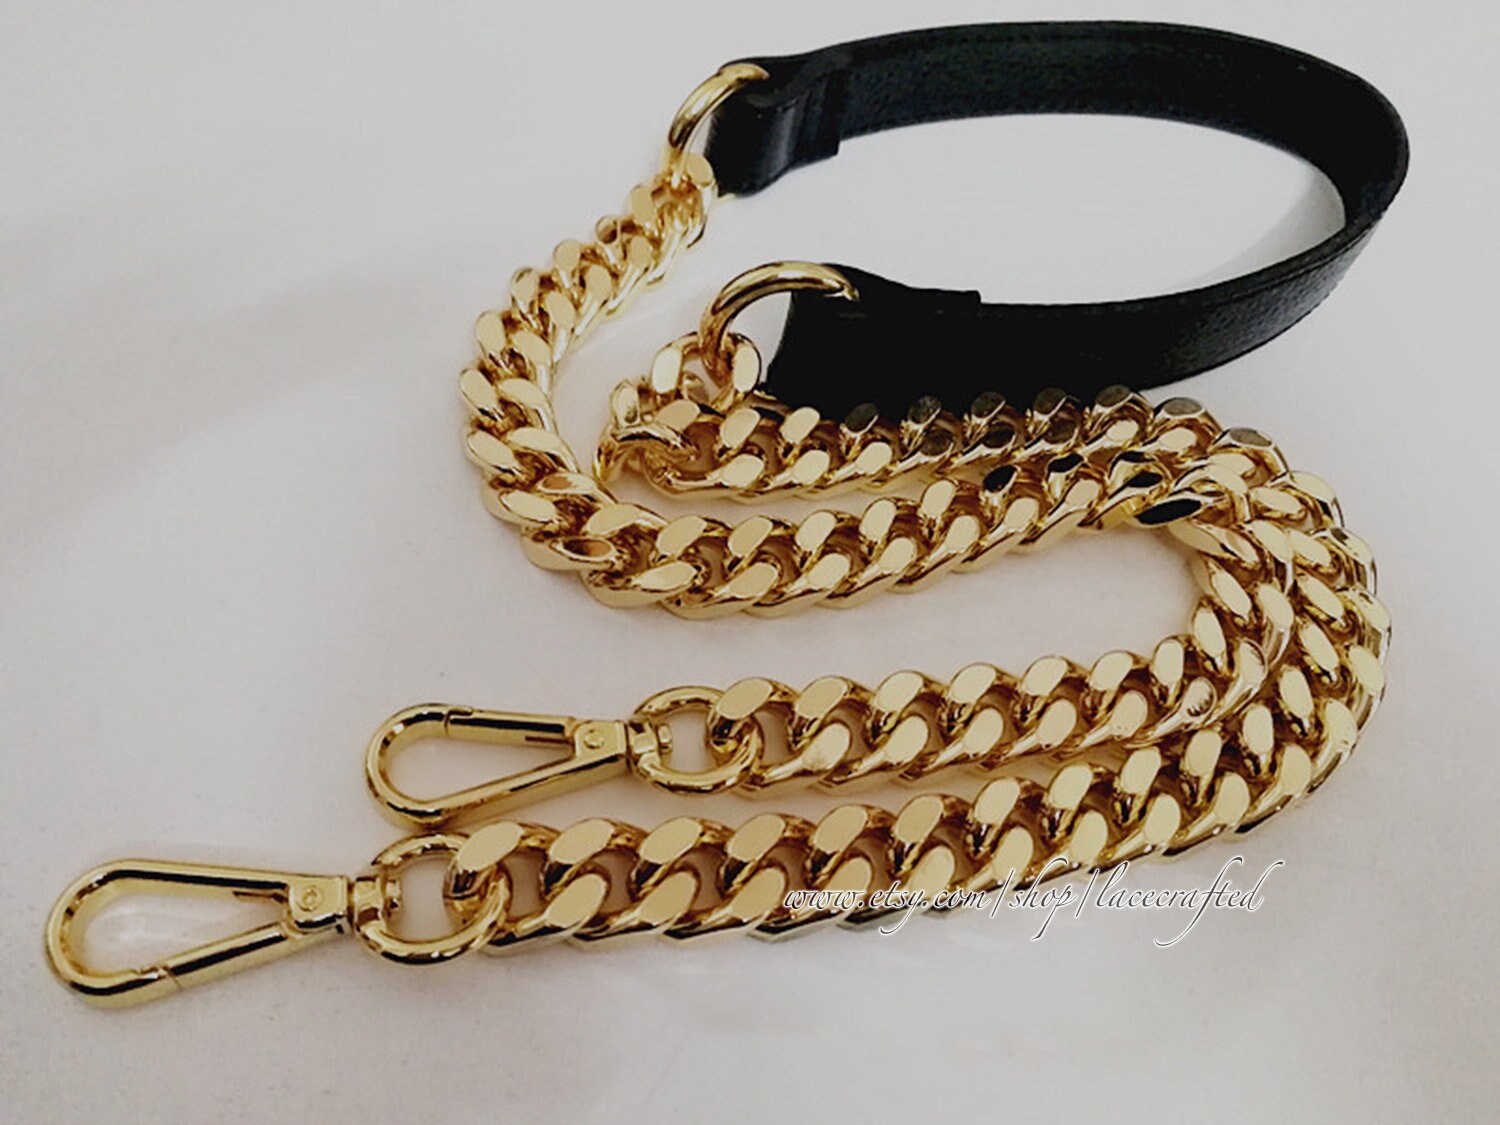 1pc 11mm Width Leather Metal Chain Strap Leather Strap Purse 